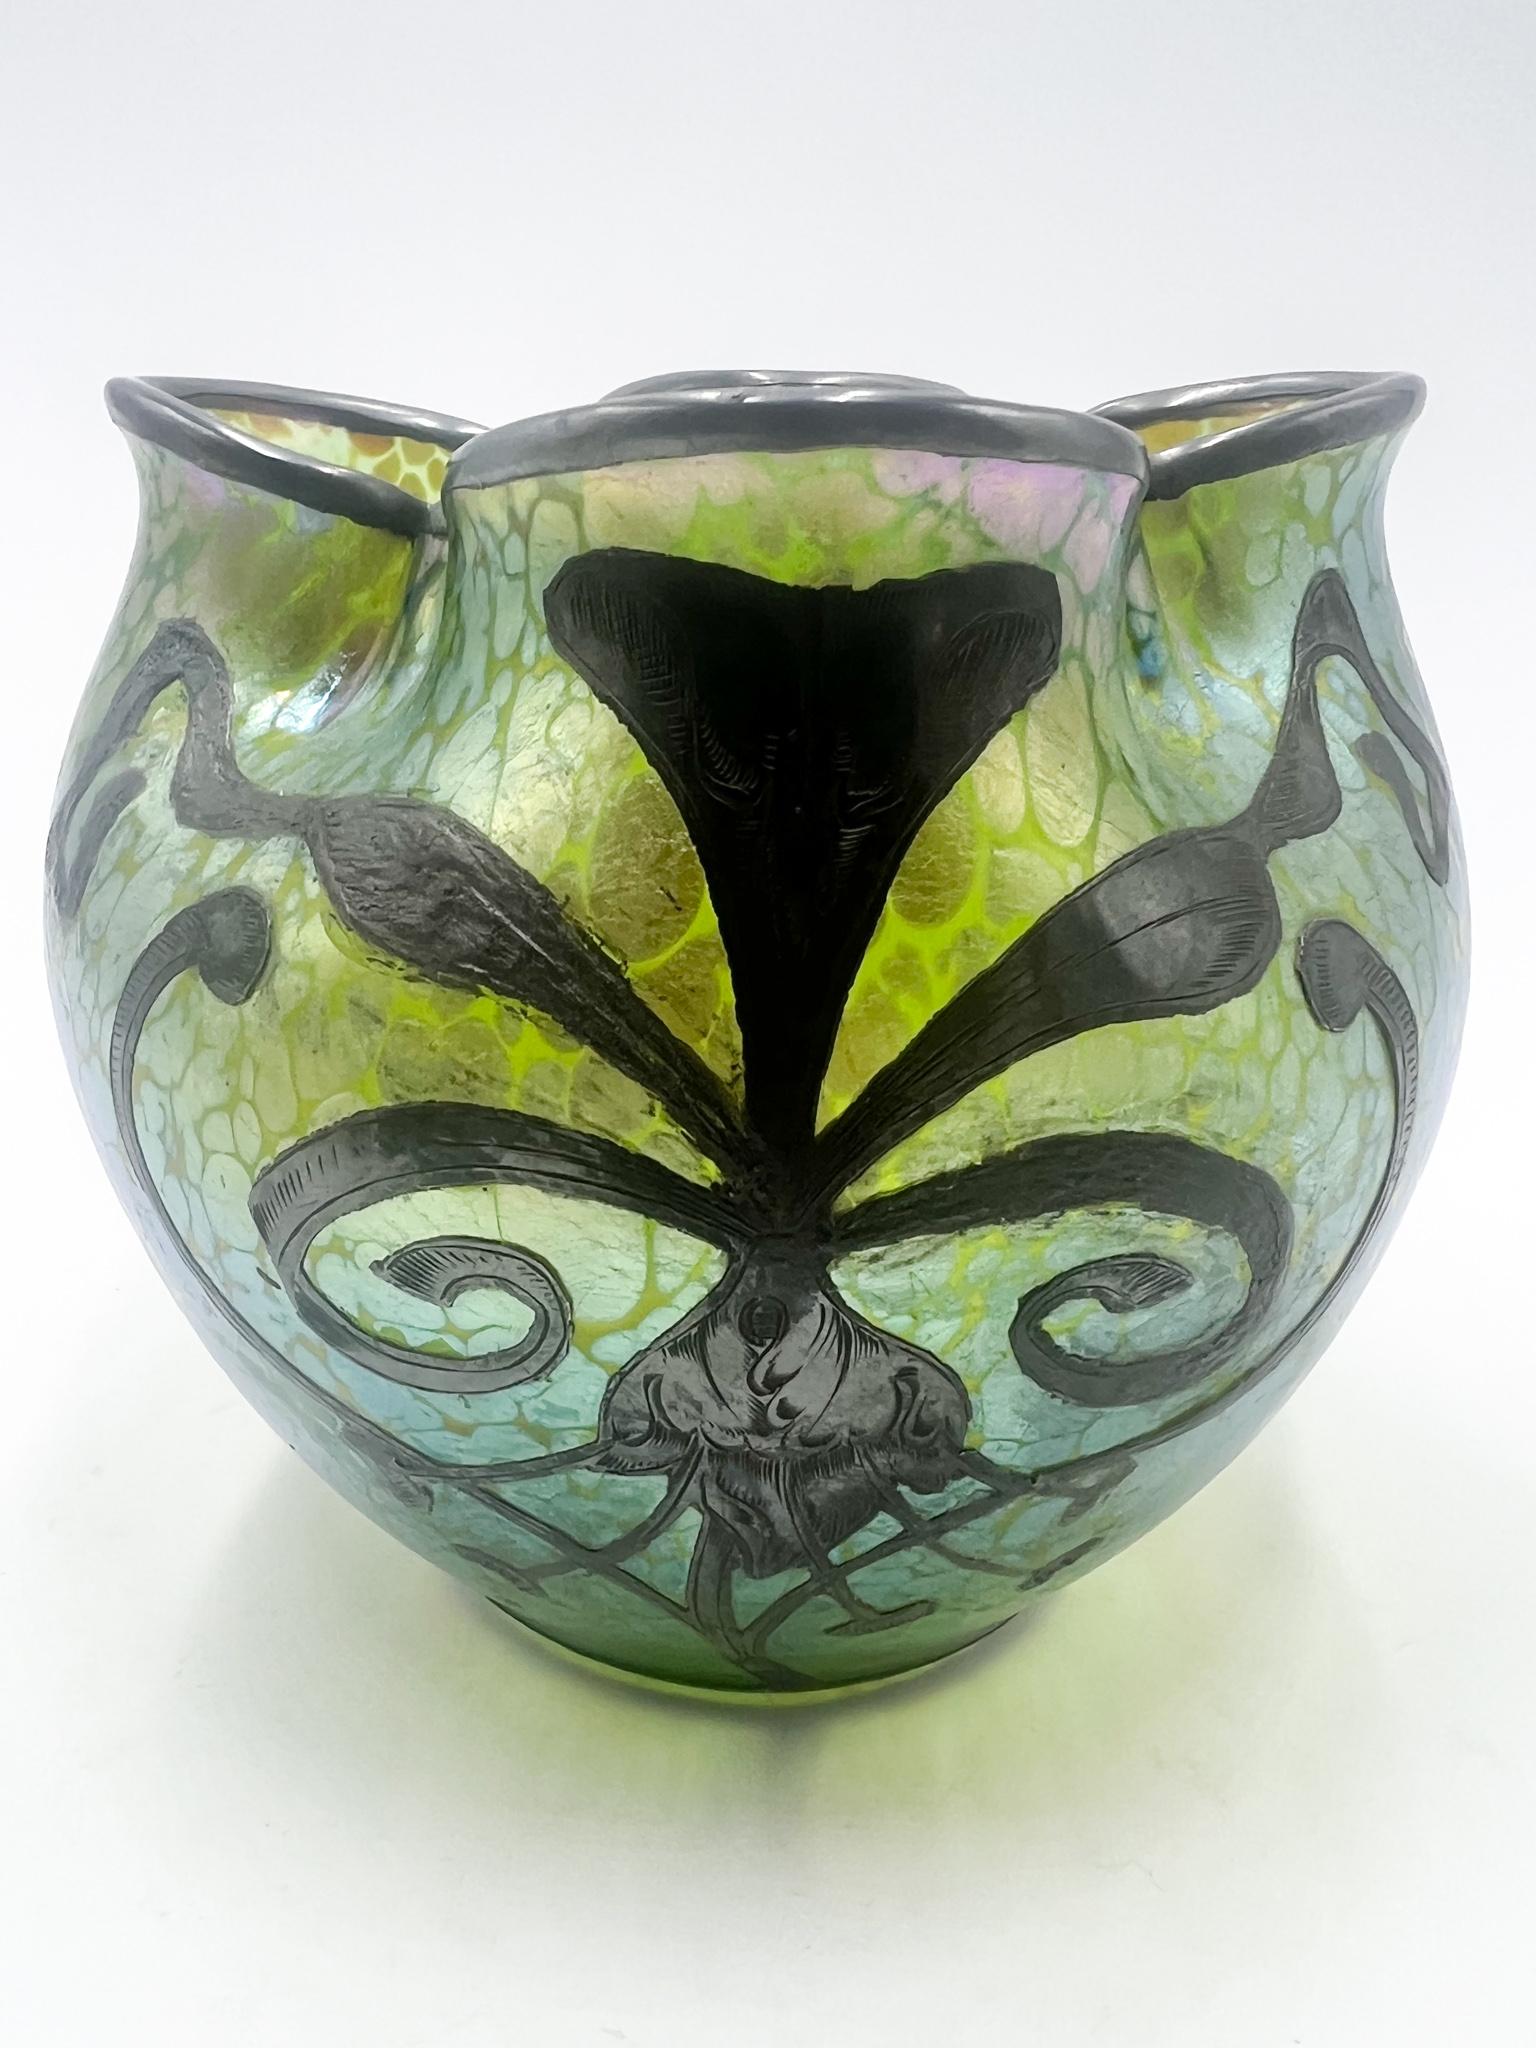 Austrian Vase in Liberty Green Iridescent Glass and Silver Metal by Loetz, 1910